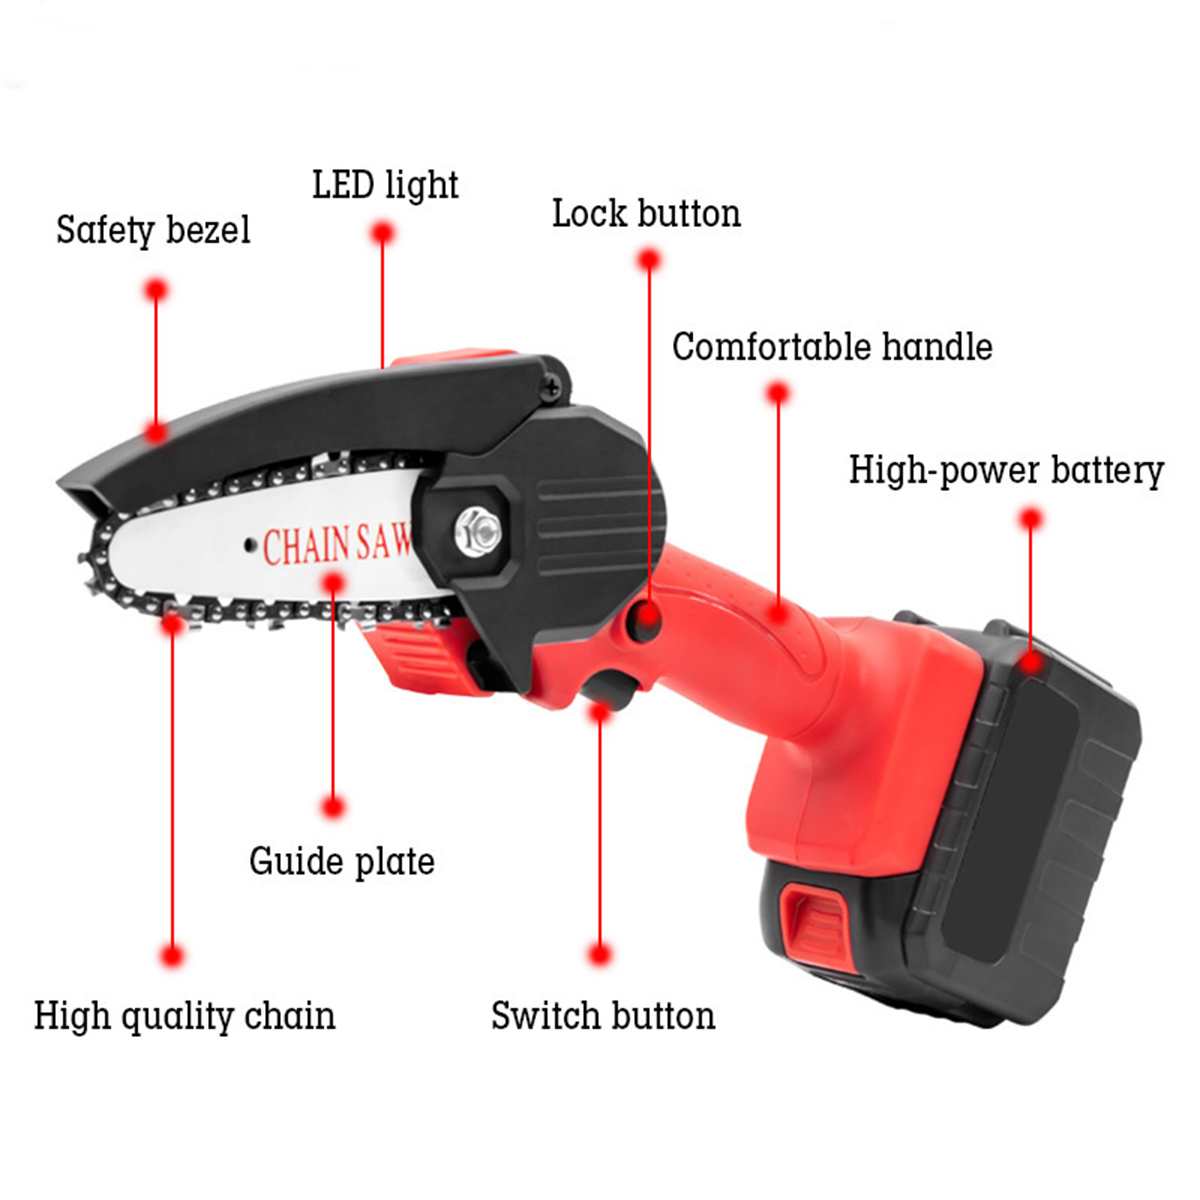 Portable-Electric-Saw-Woodworking-Chain-Saw-Tree-Pruning-Tool-for-18V-MakitaIzumi-Battery-1764621-8